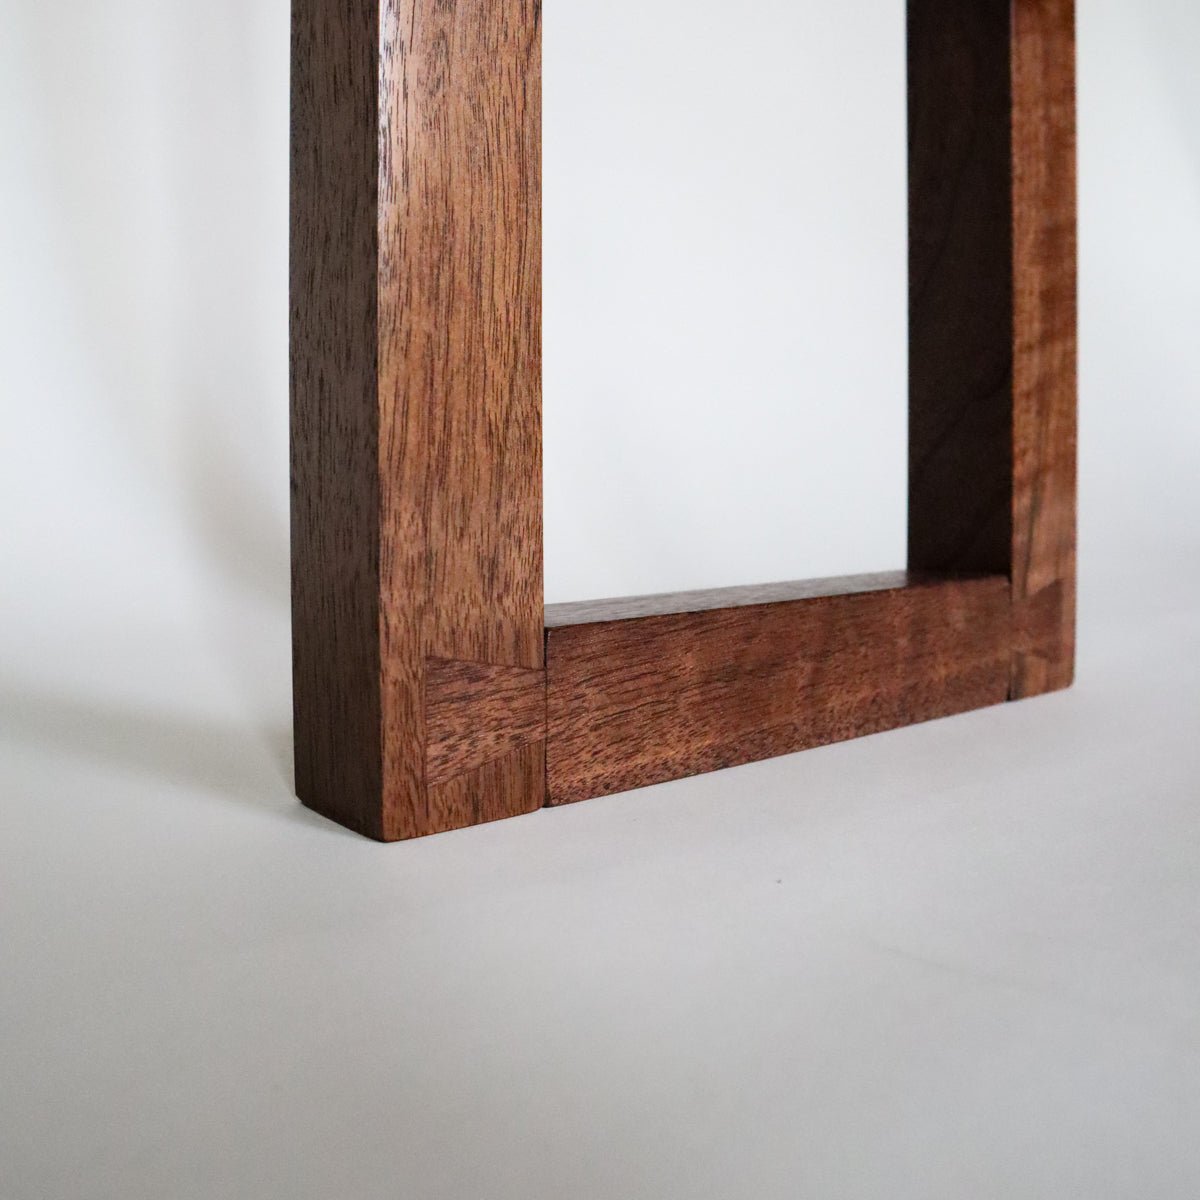 This are special dovetail feet details on a narrow console table created by Mokuzai Furniture.